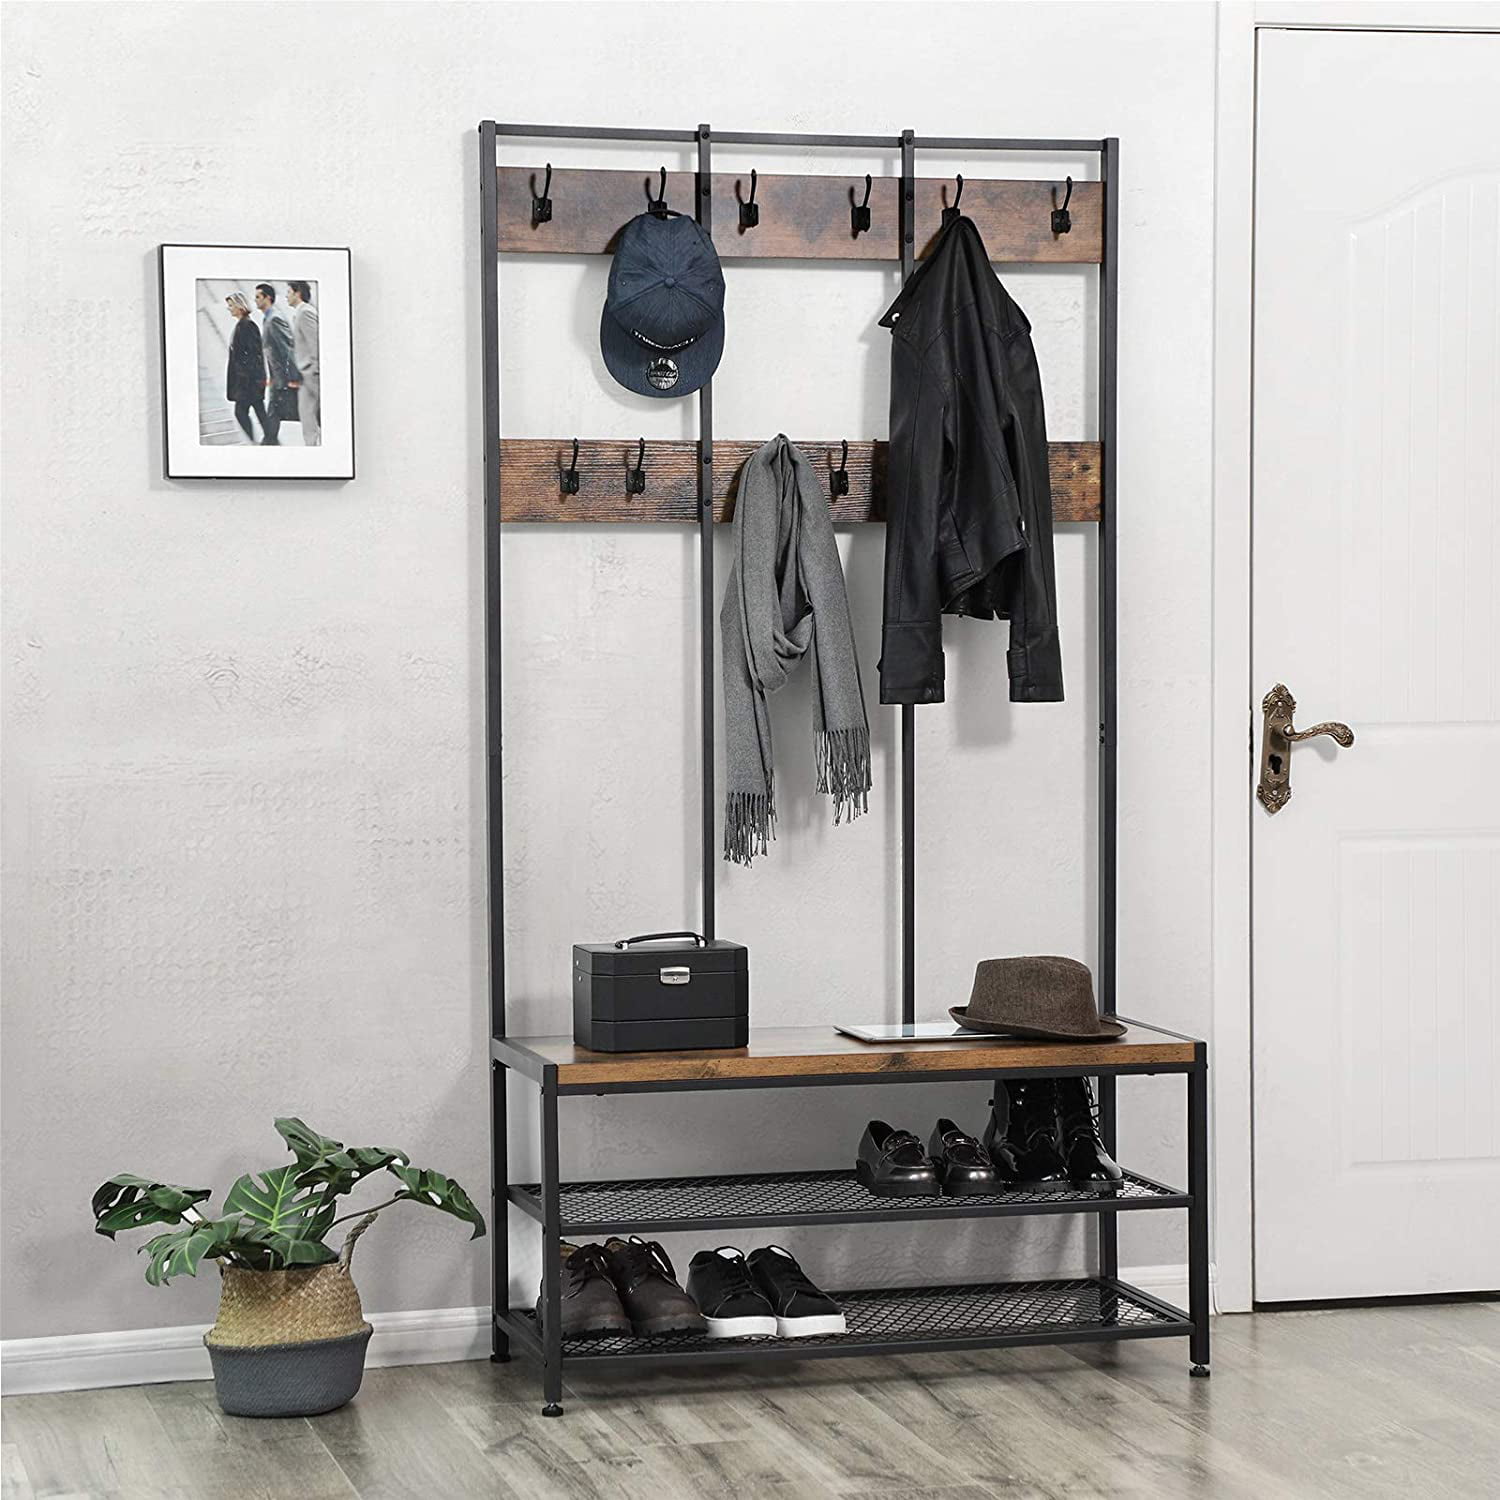 Bedroom Greige and Black HSR086B02 VASAGLE Large Coat Rack Stand Office Coat Tree with 12 Hooks and Shoe Bench in Industrial Design Hall Tree Multifunctional Hallway Shelf 